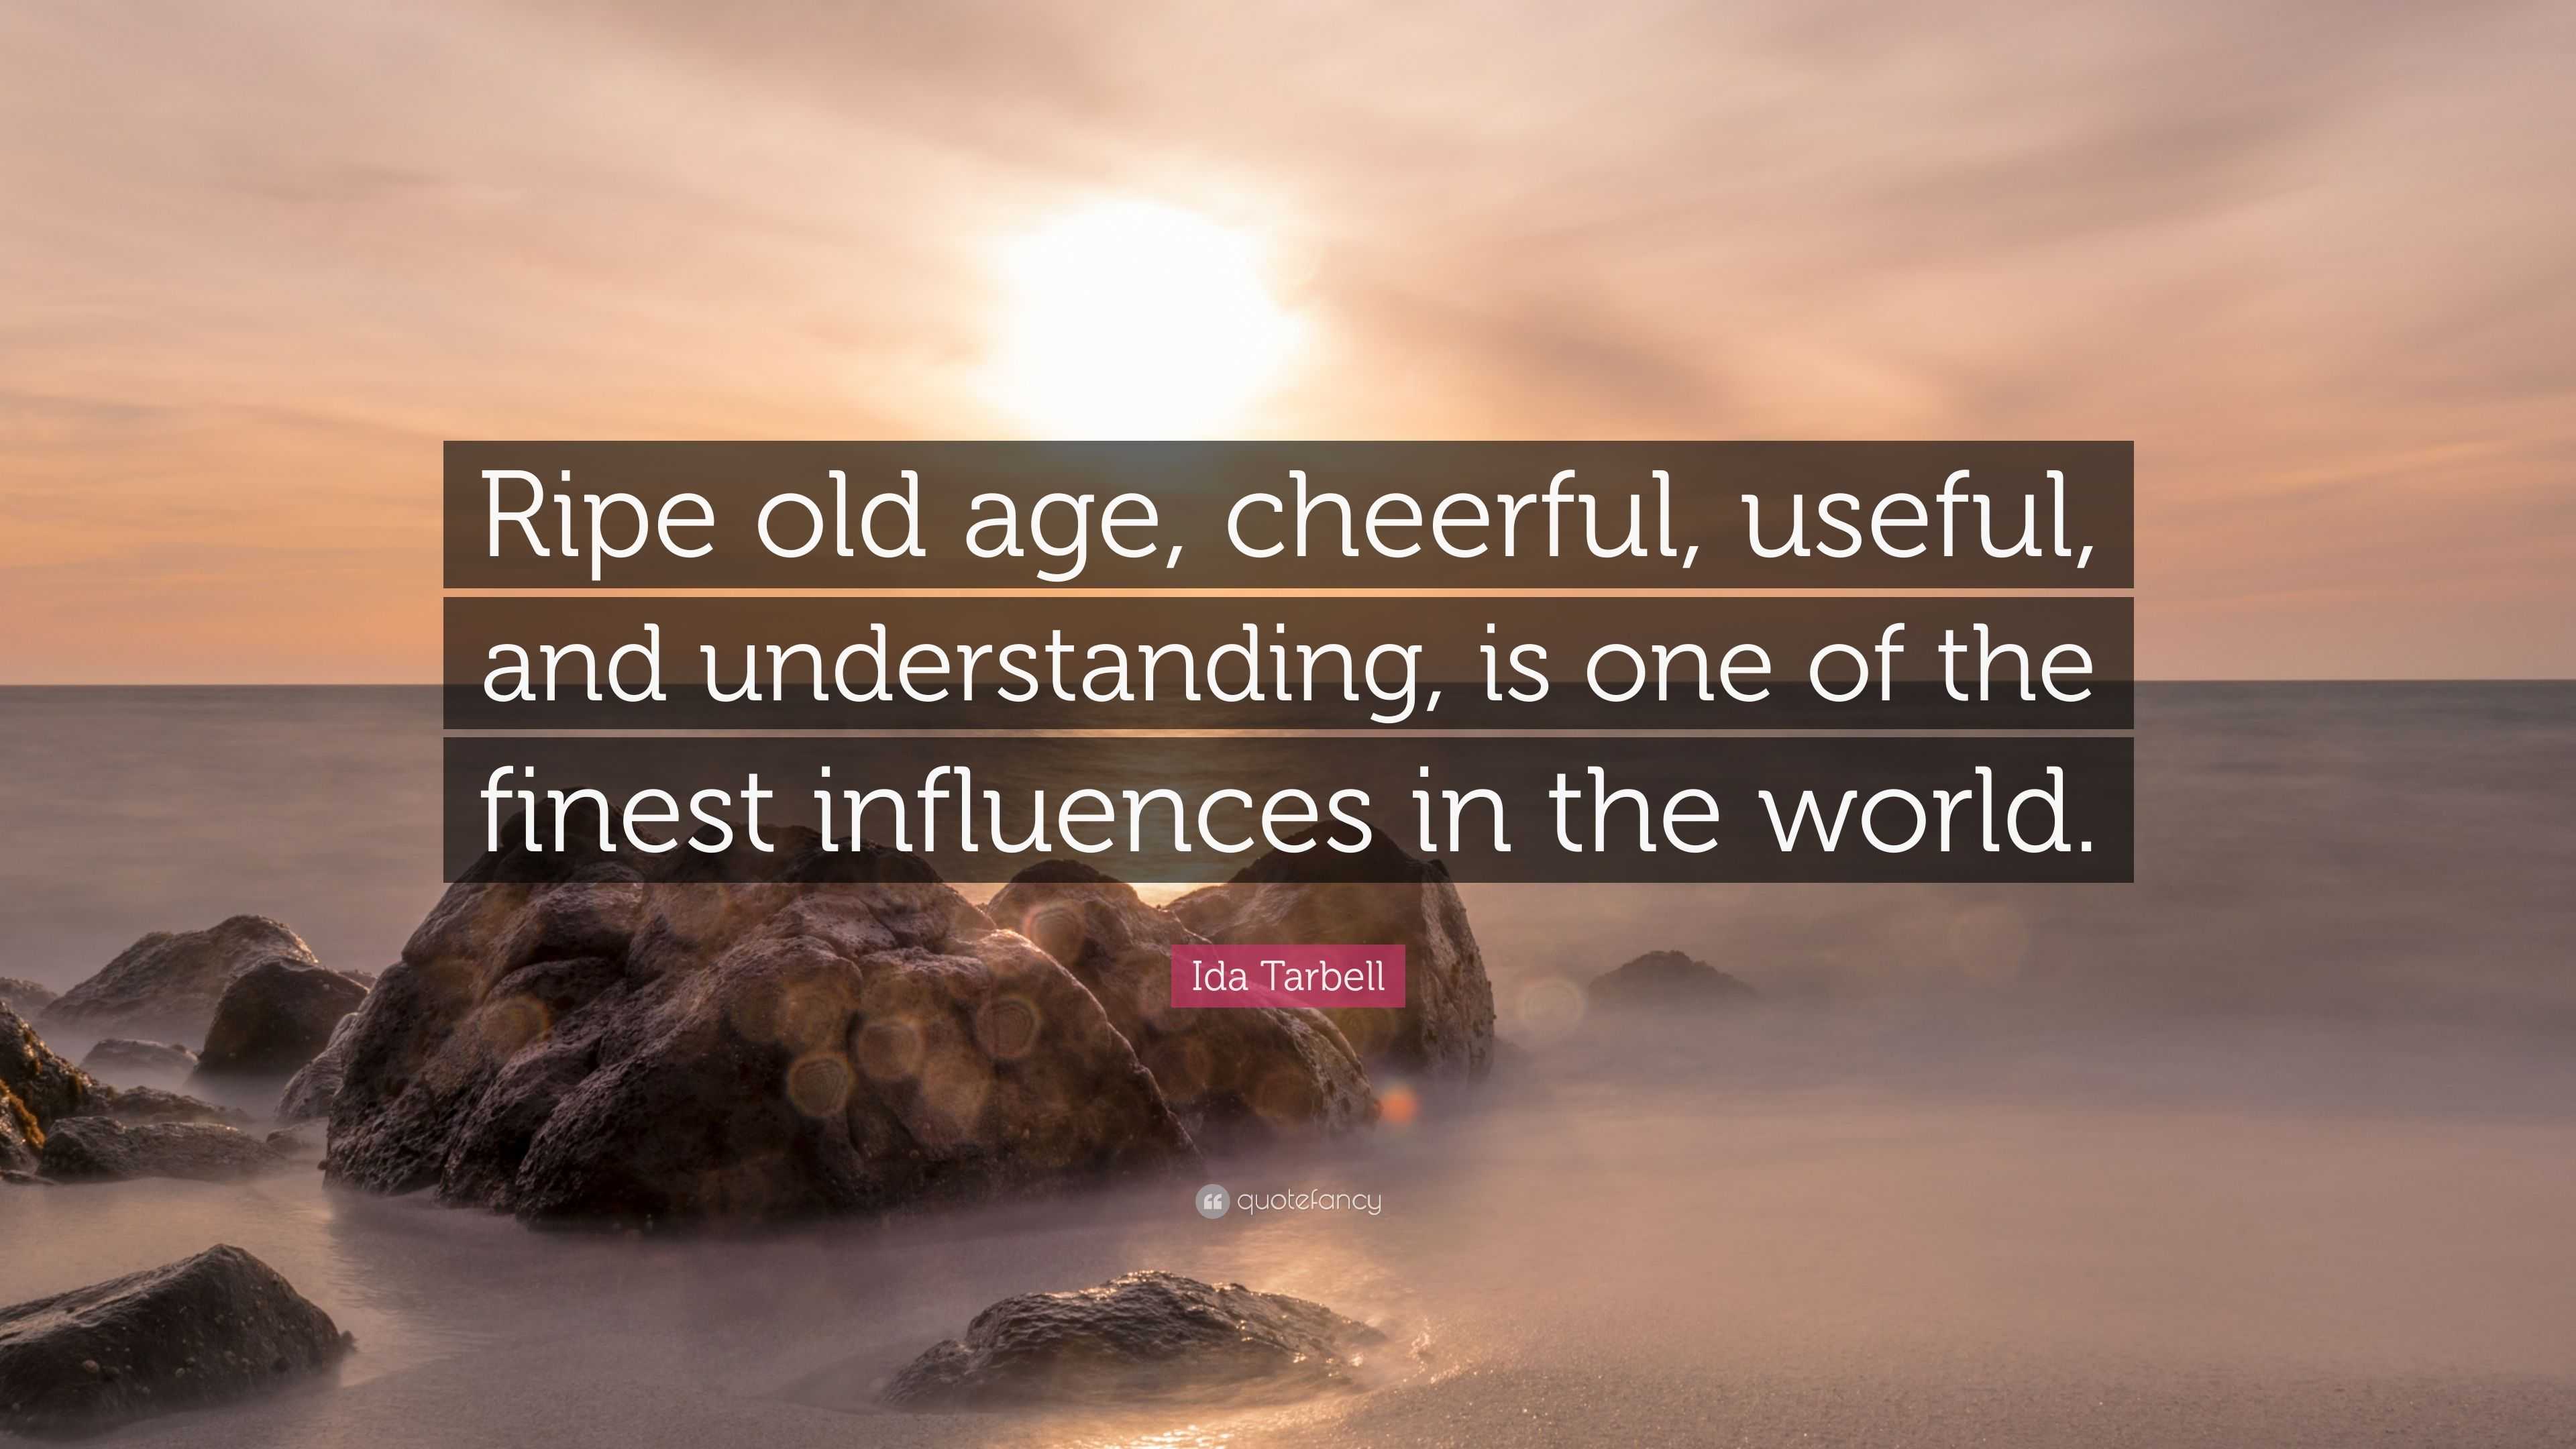 Ida Tarbell Quote: “Ripe old age, cheerful, useful, and understanding, is  one of the finest influences